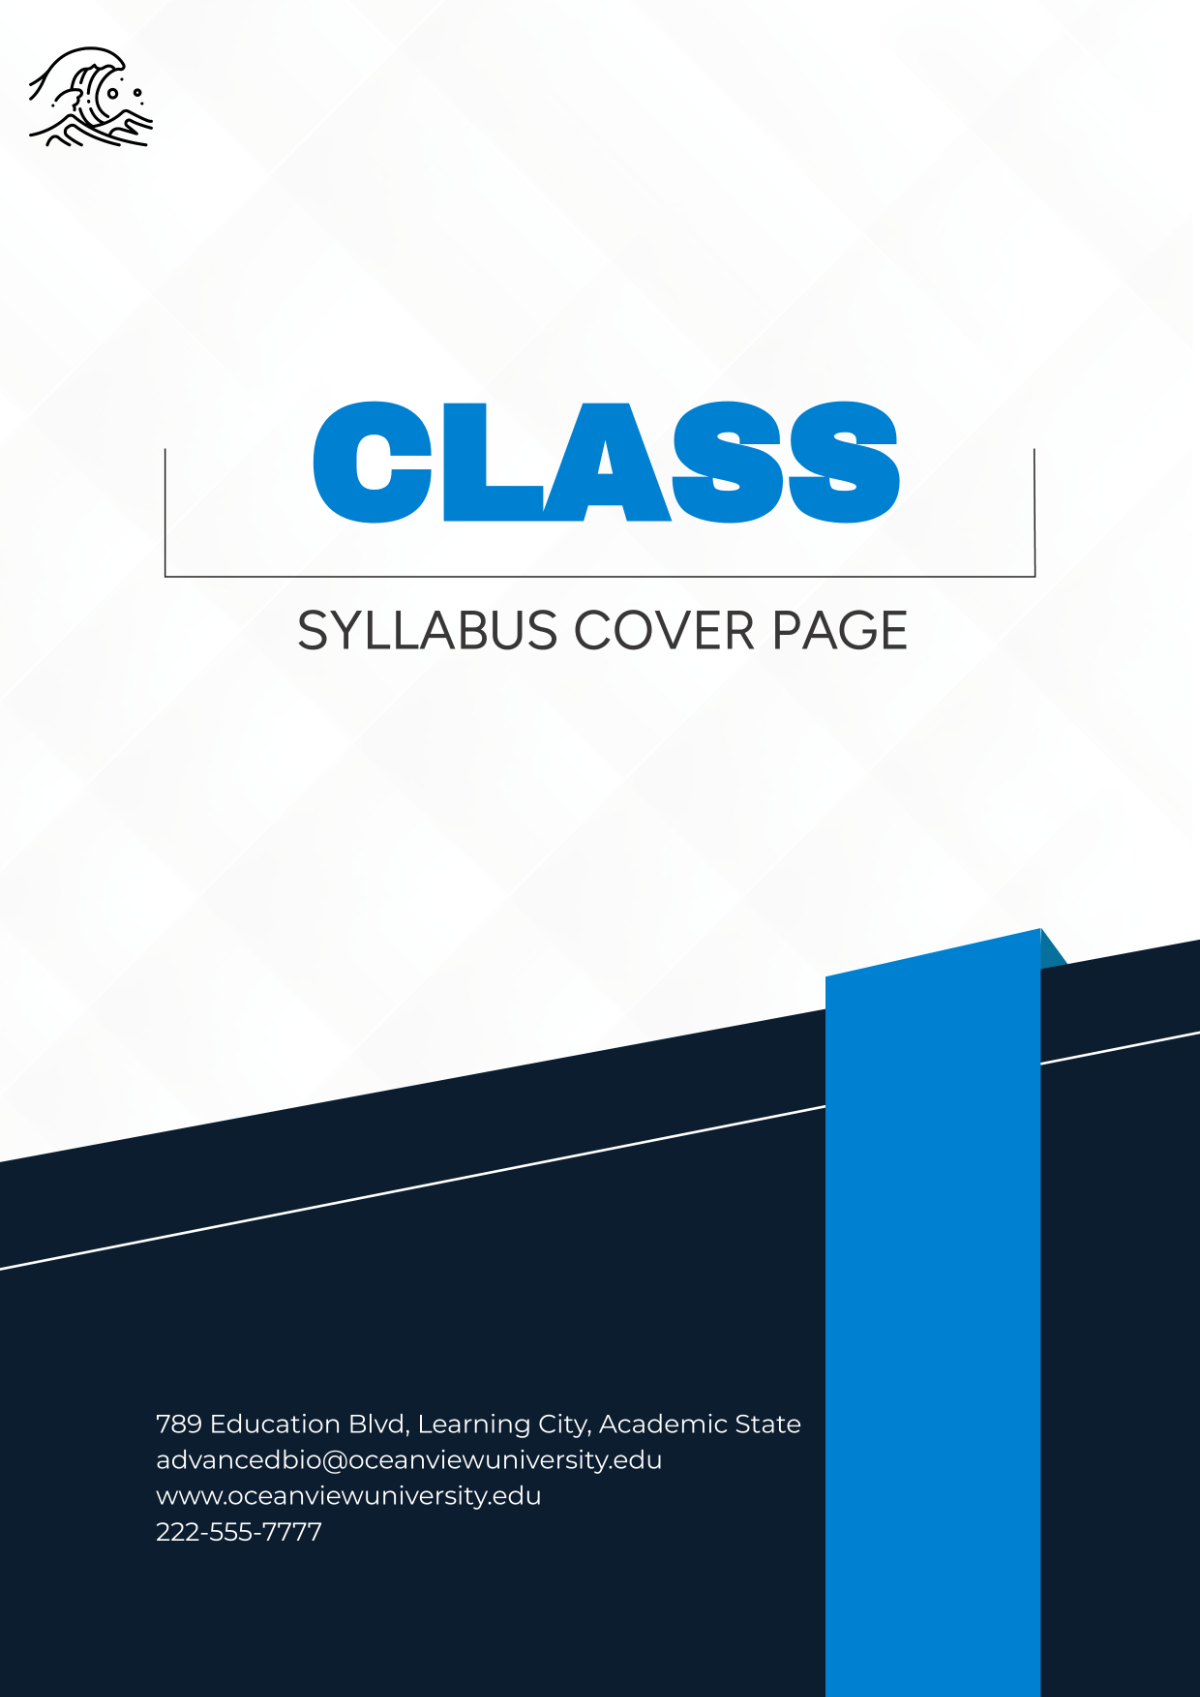 Class Syllabus Cover Page